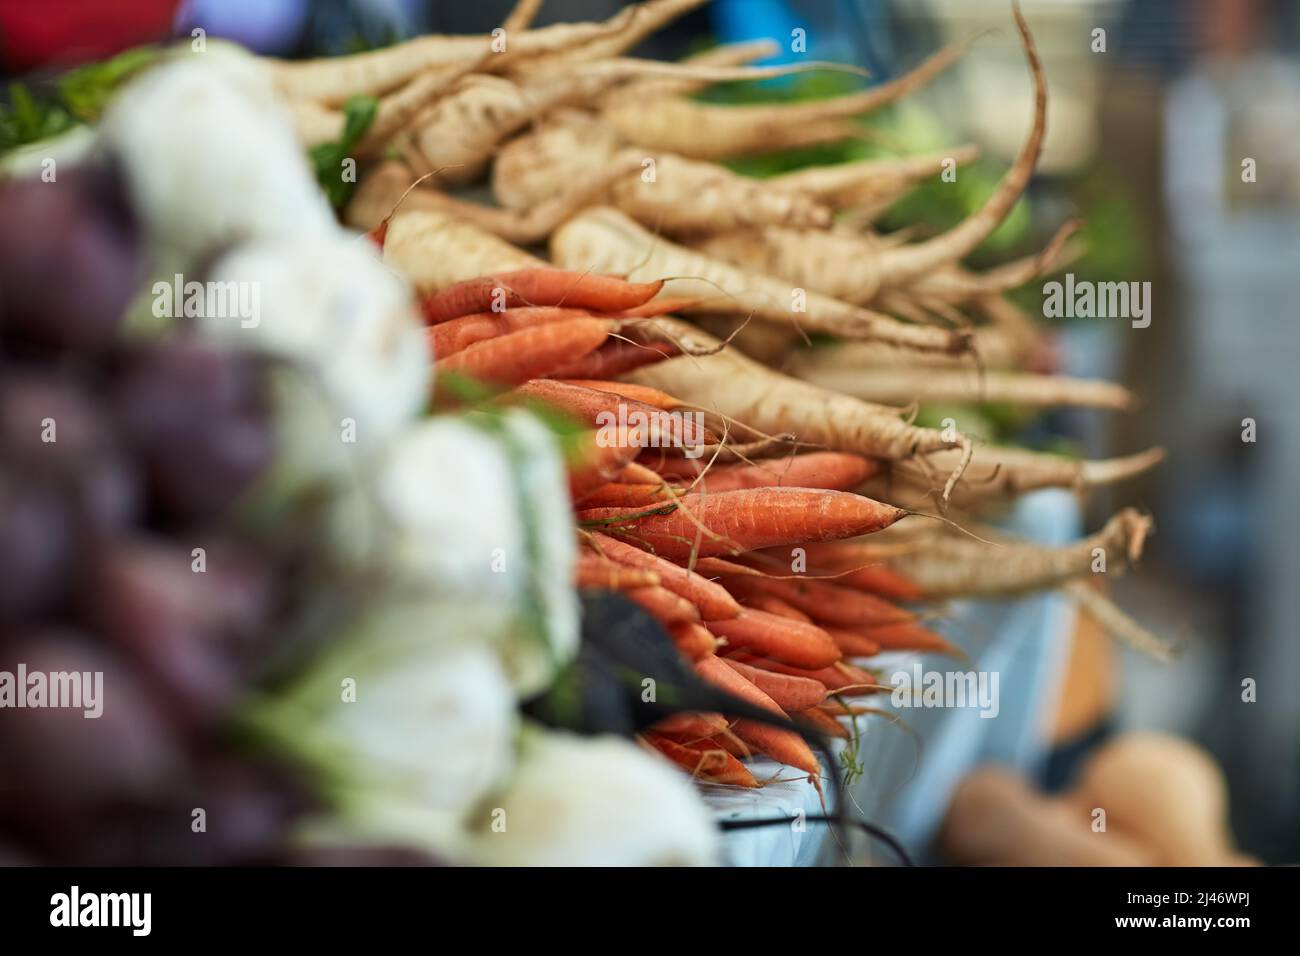 Sourced fresh from the farmers market. Shot of fresh produce in a grocery store. Stock Photo